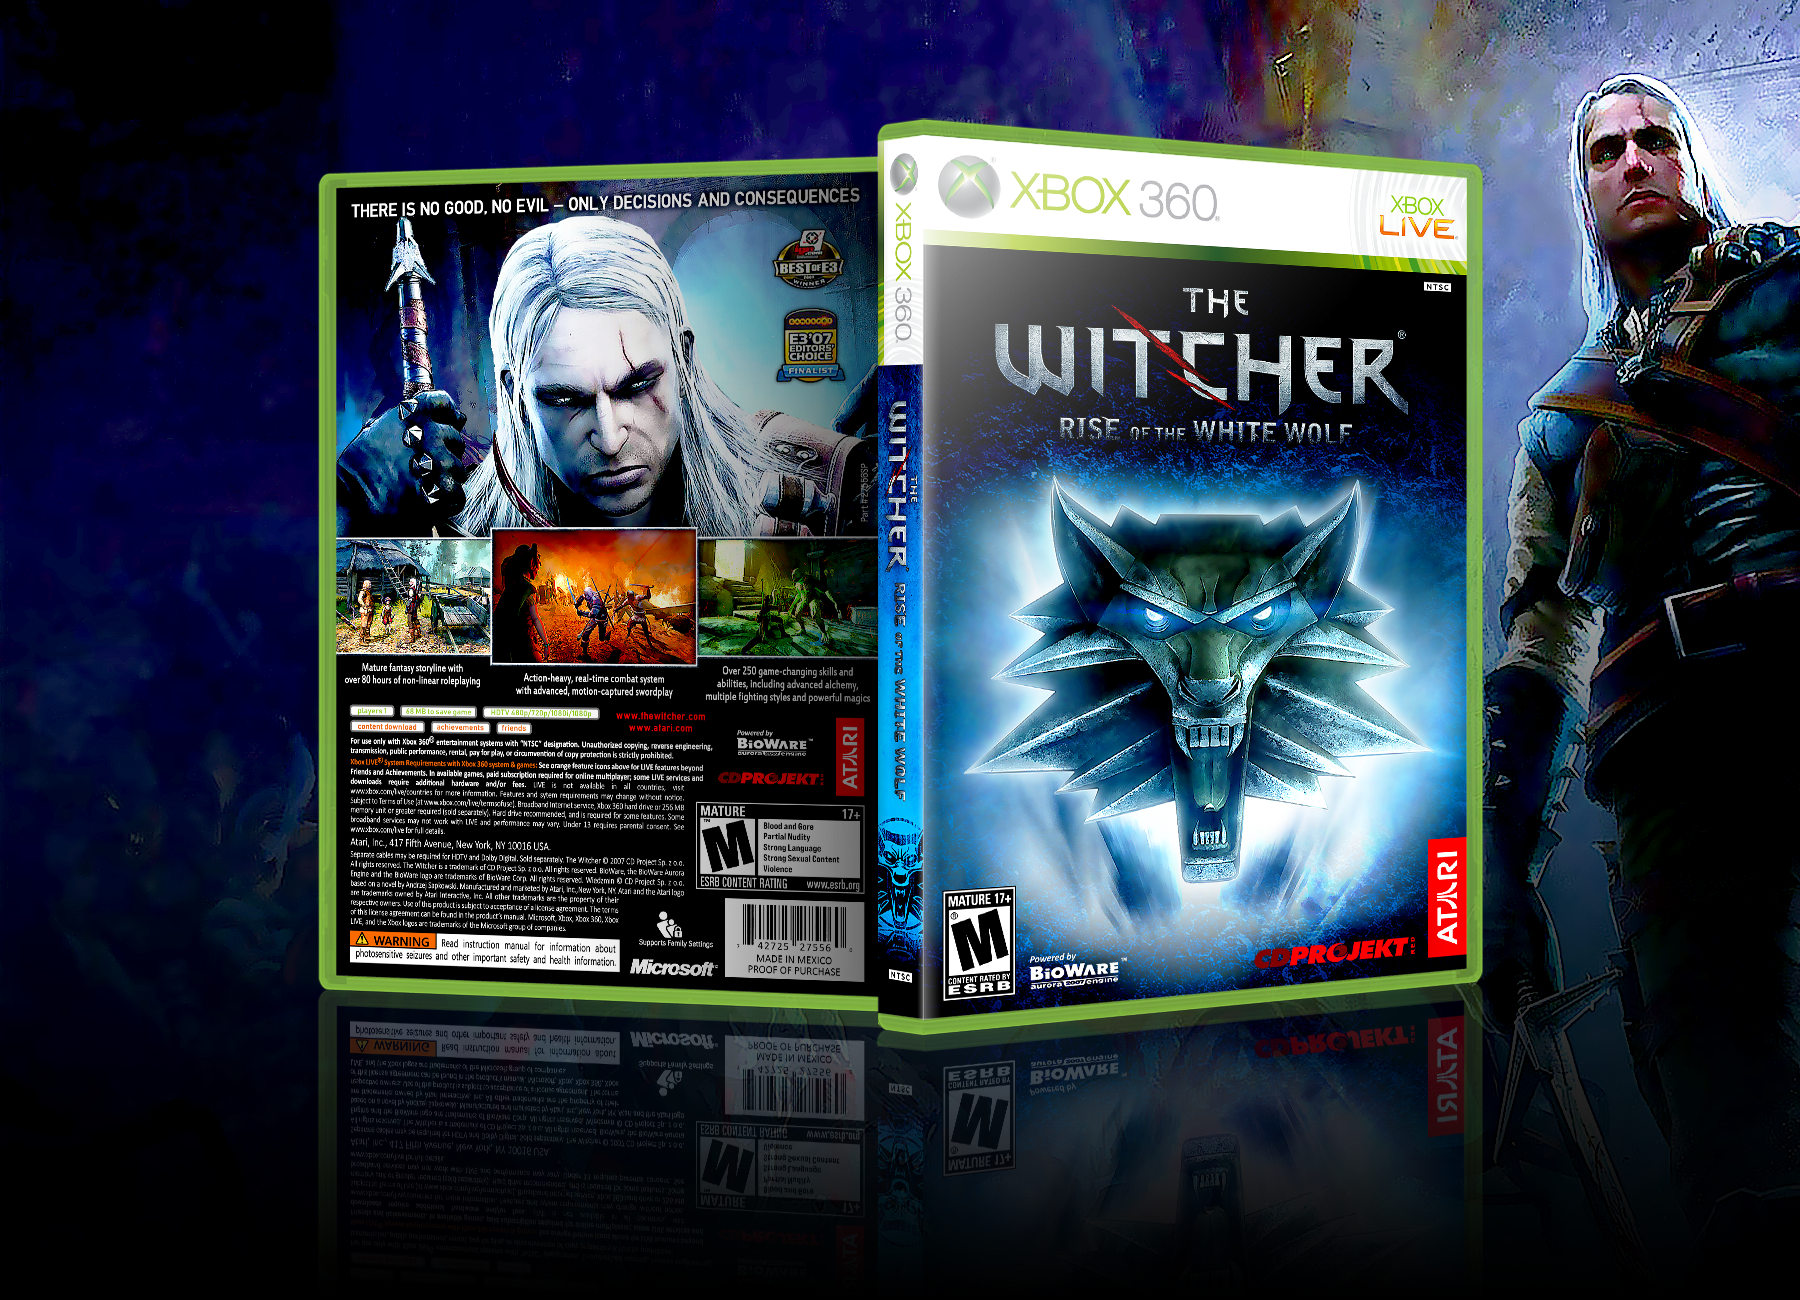 The Witcher: Rise of the White Wolf box cover